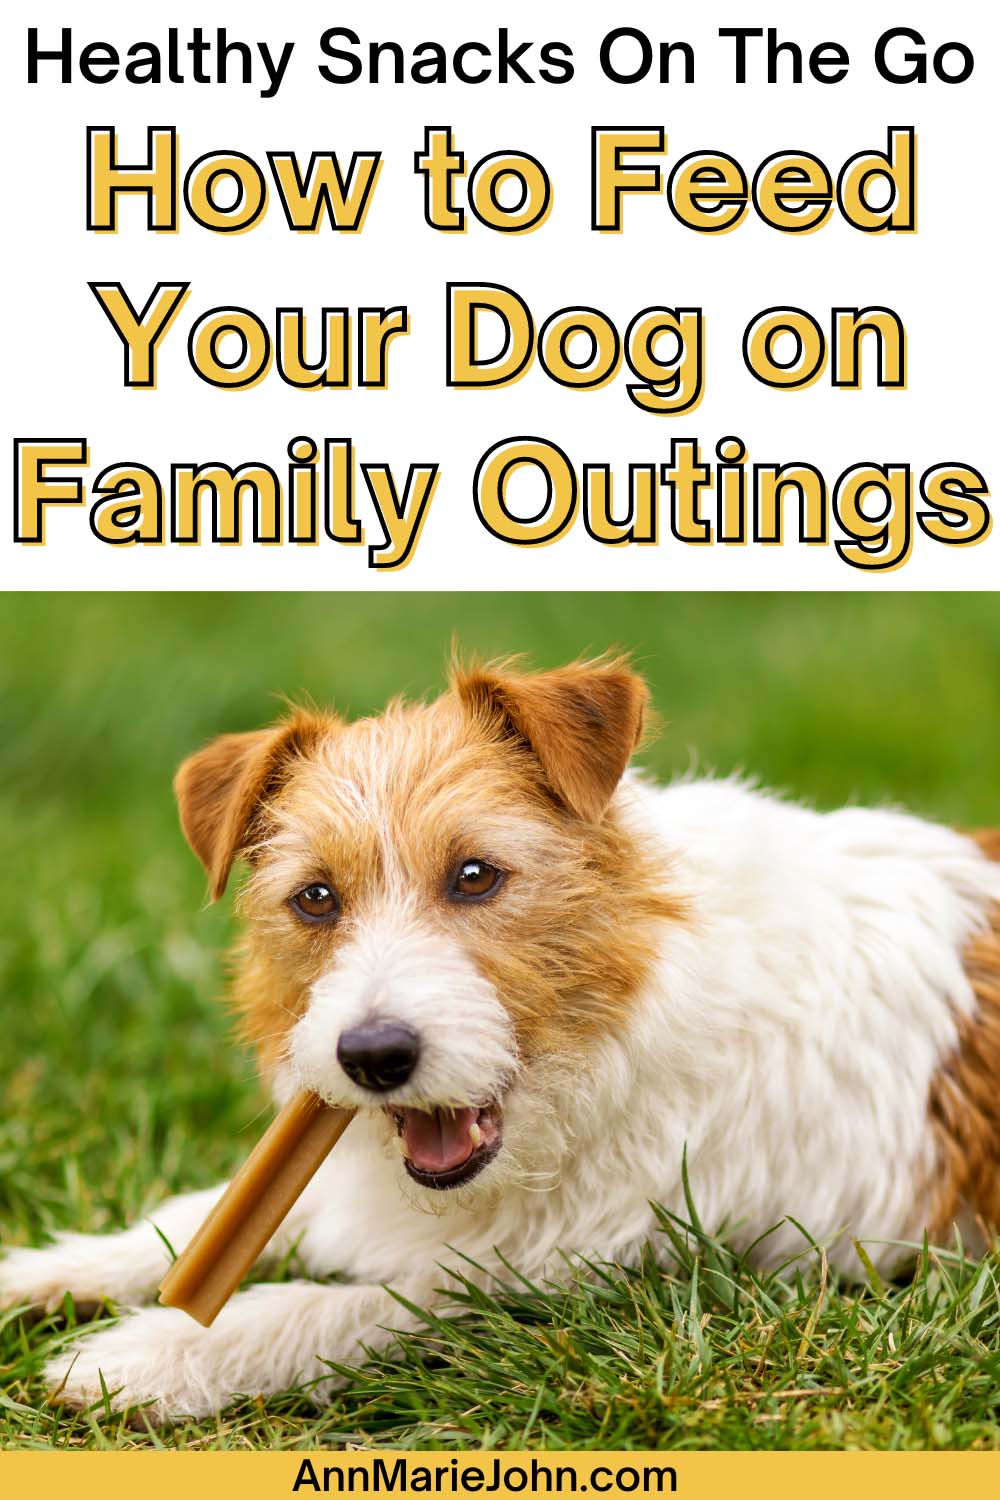 How to Feed Your Dog on Family Outings